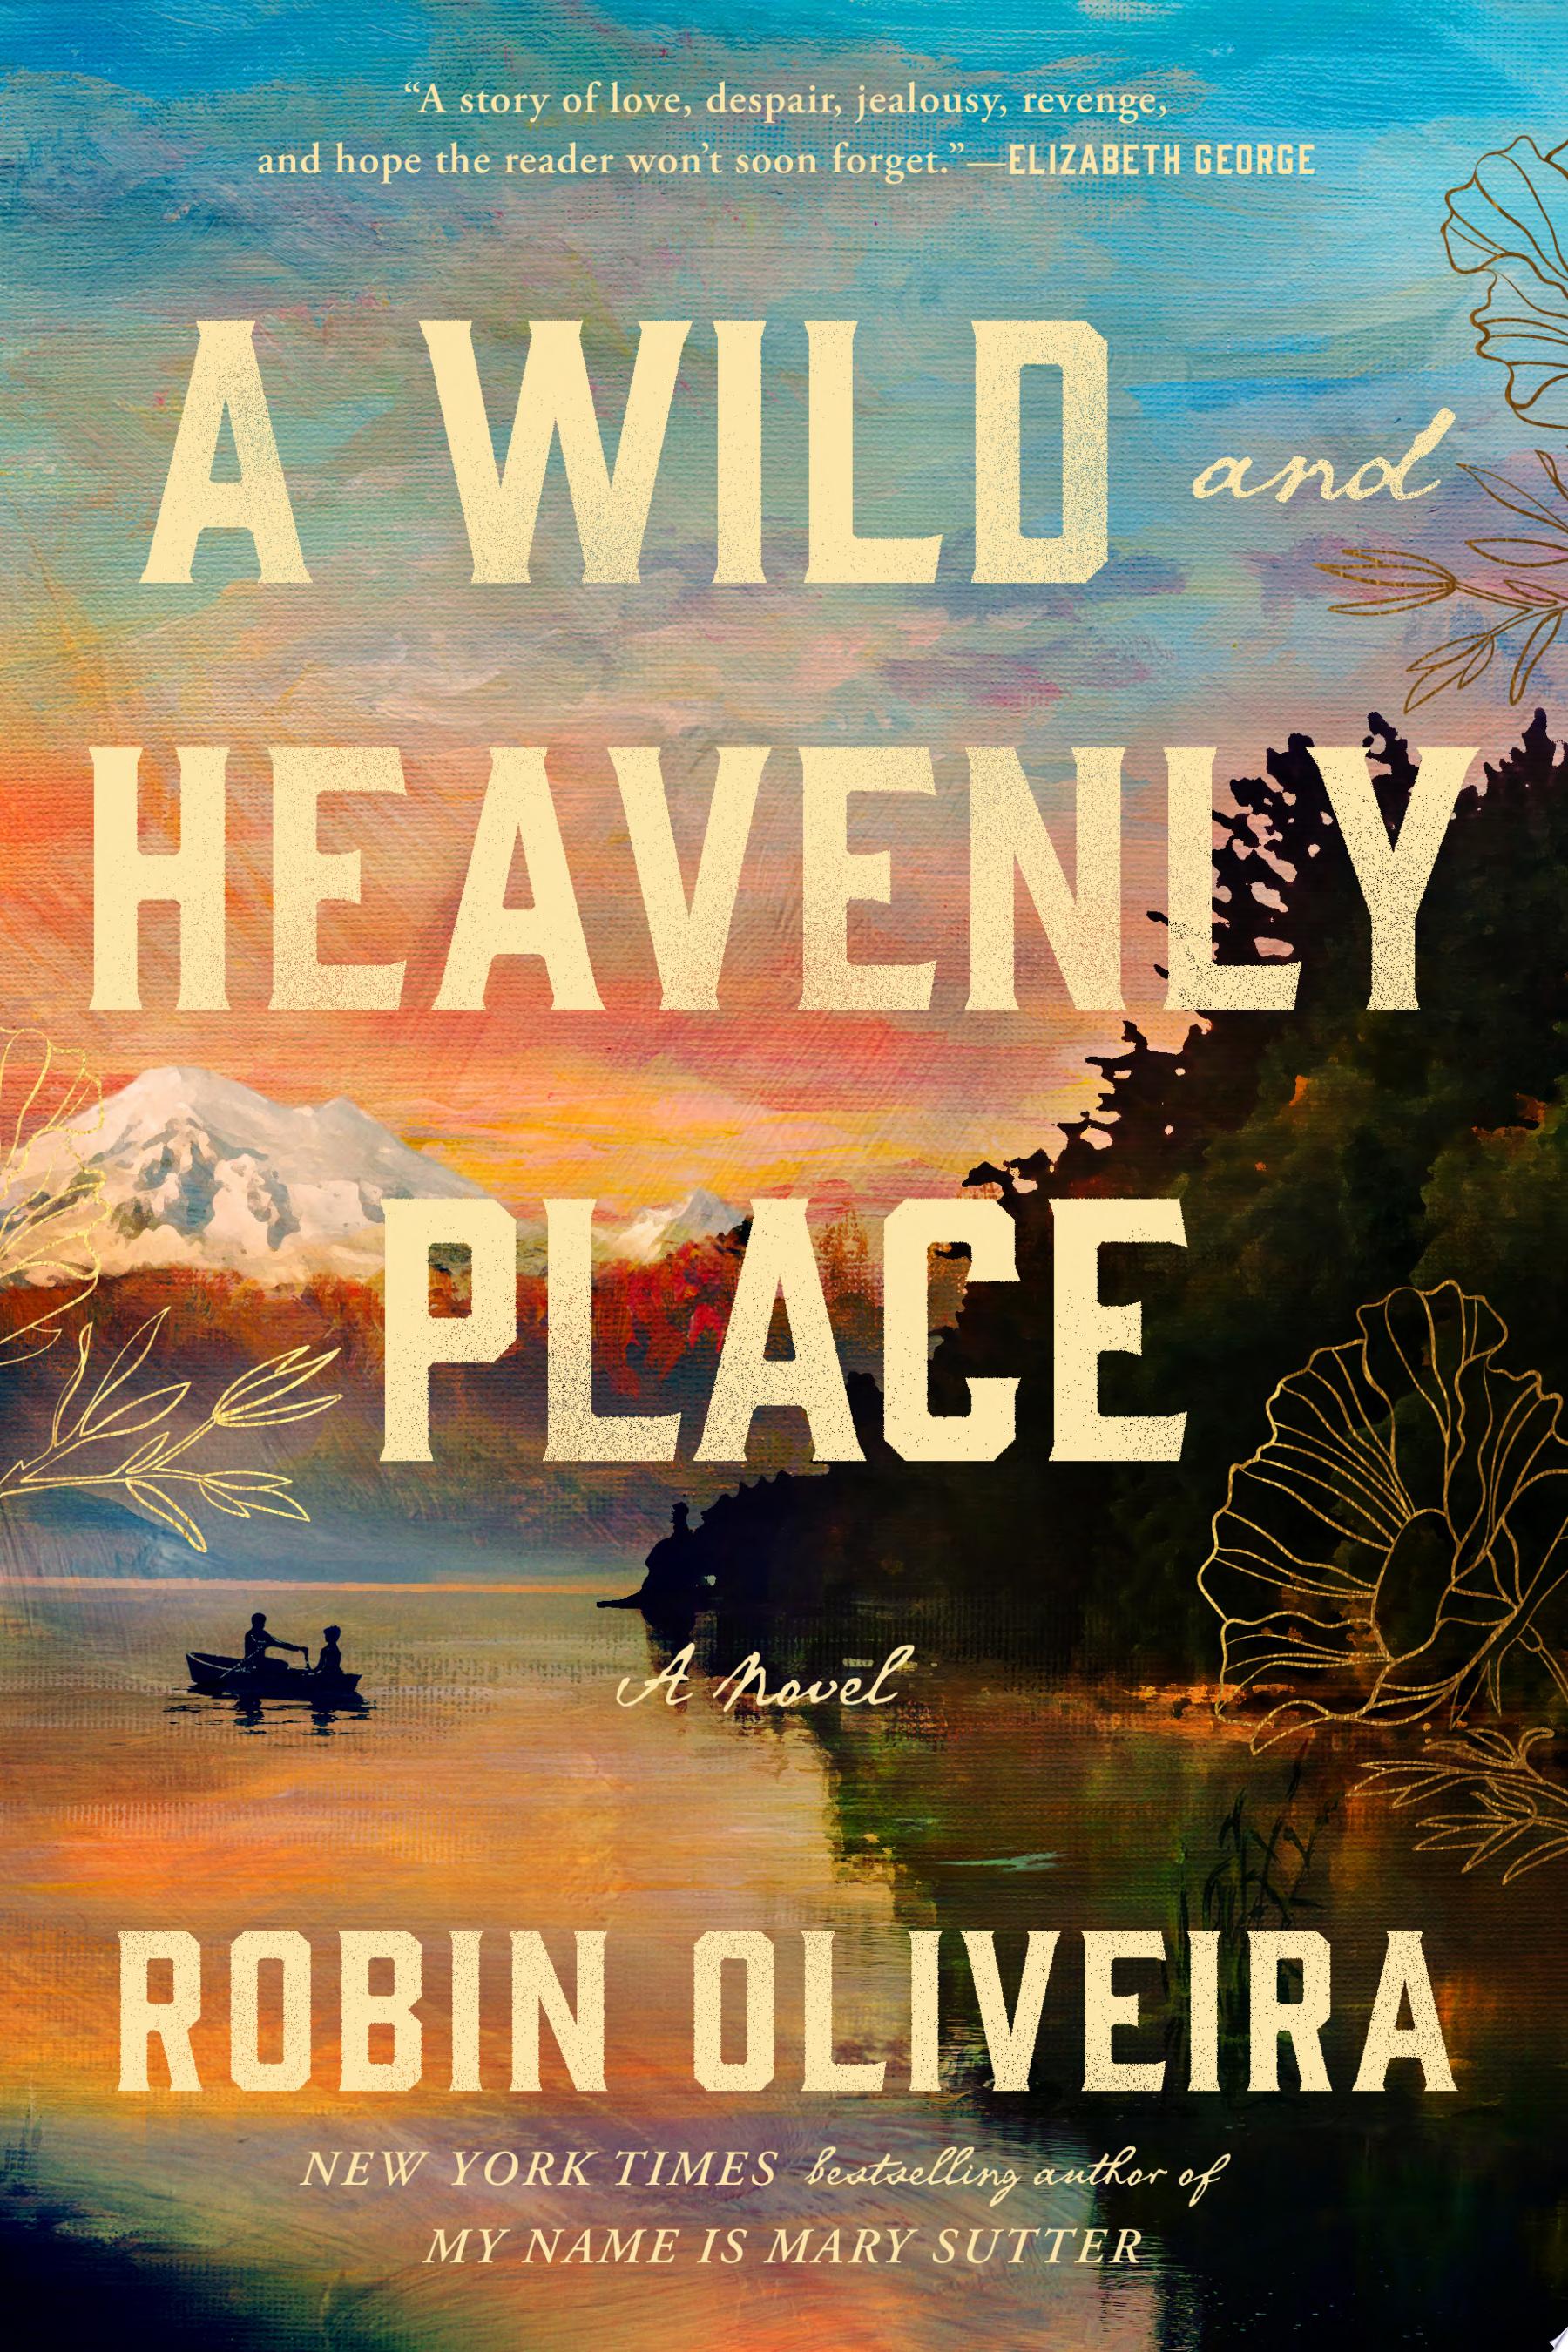 Image for "A Wild and Heavenly Place"